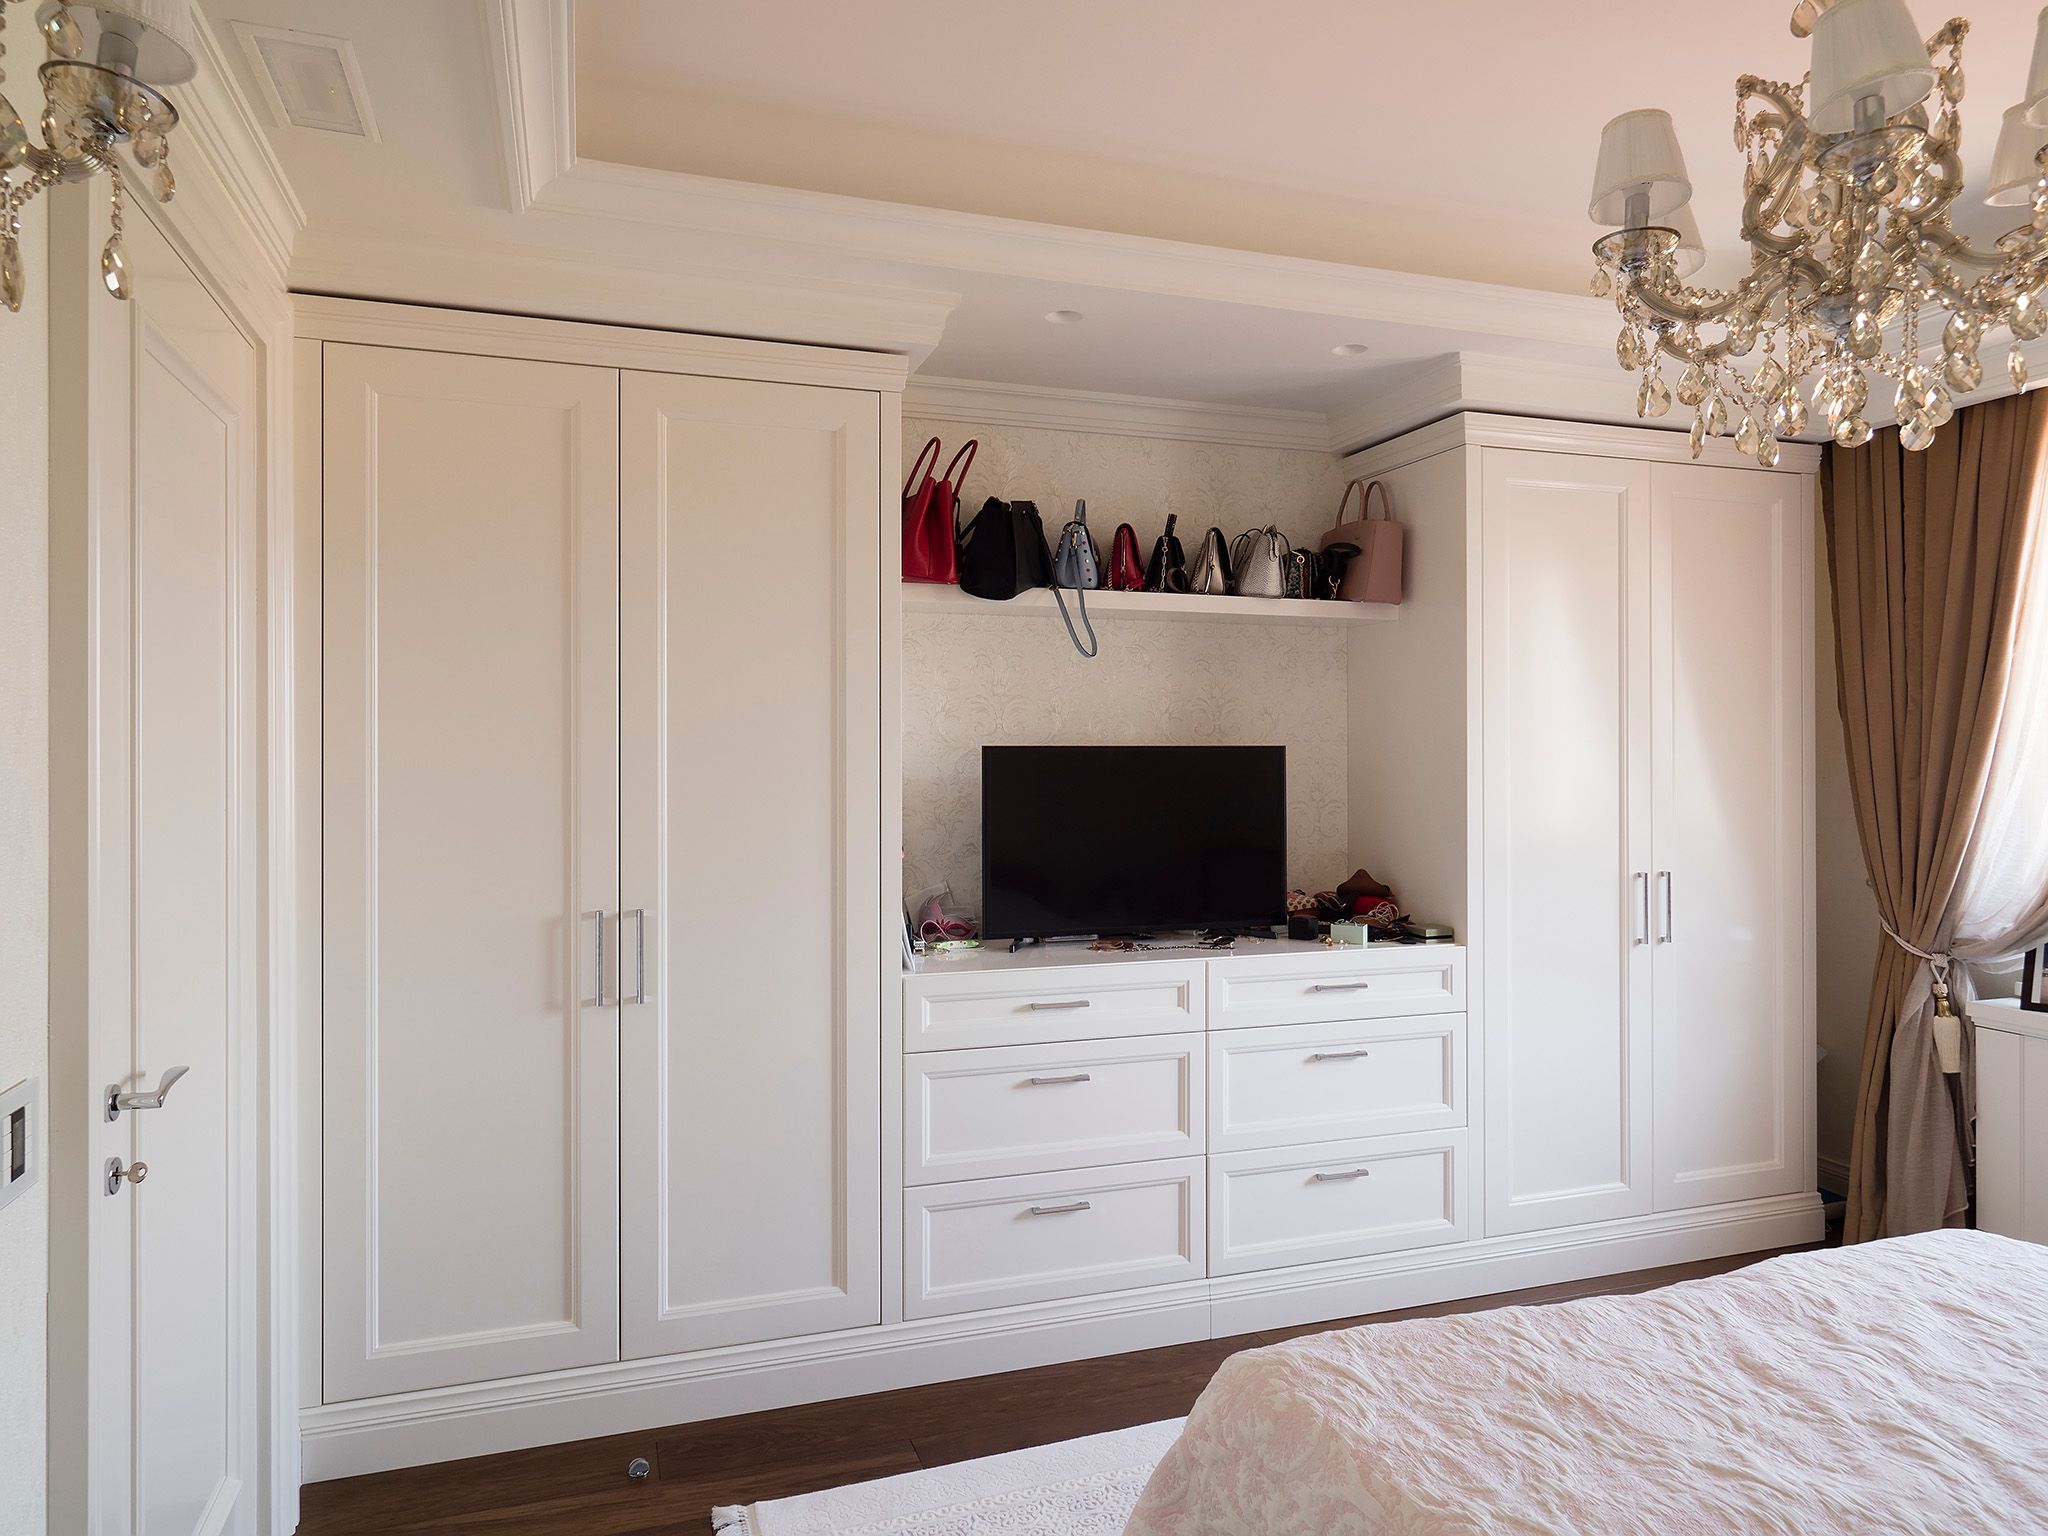 Fitted Wardrobes Ideas | Bedroom Ideas For Couples Throughout Bedroom Wardrobes (Gallery 18 of 20)